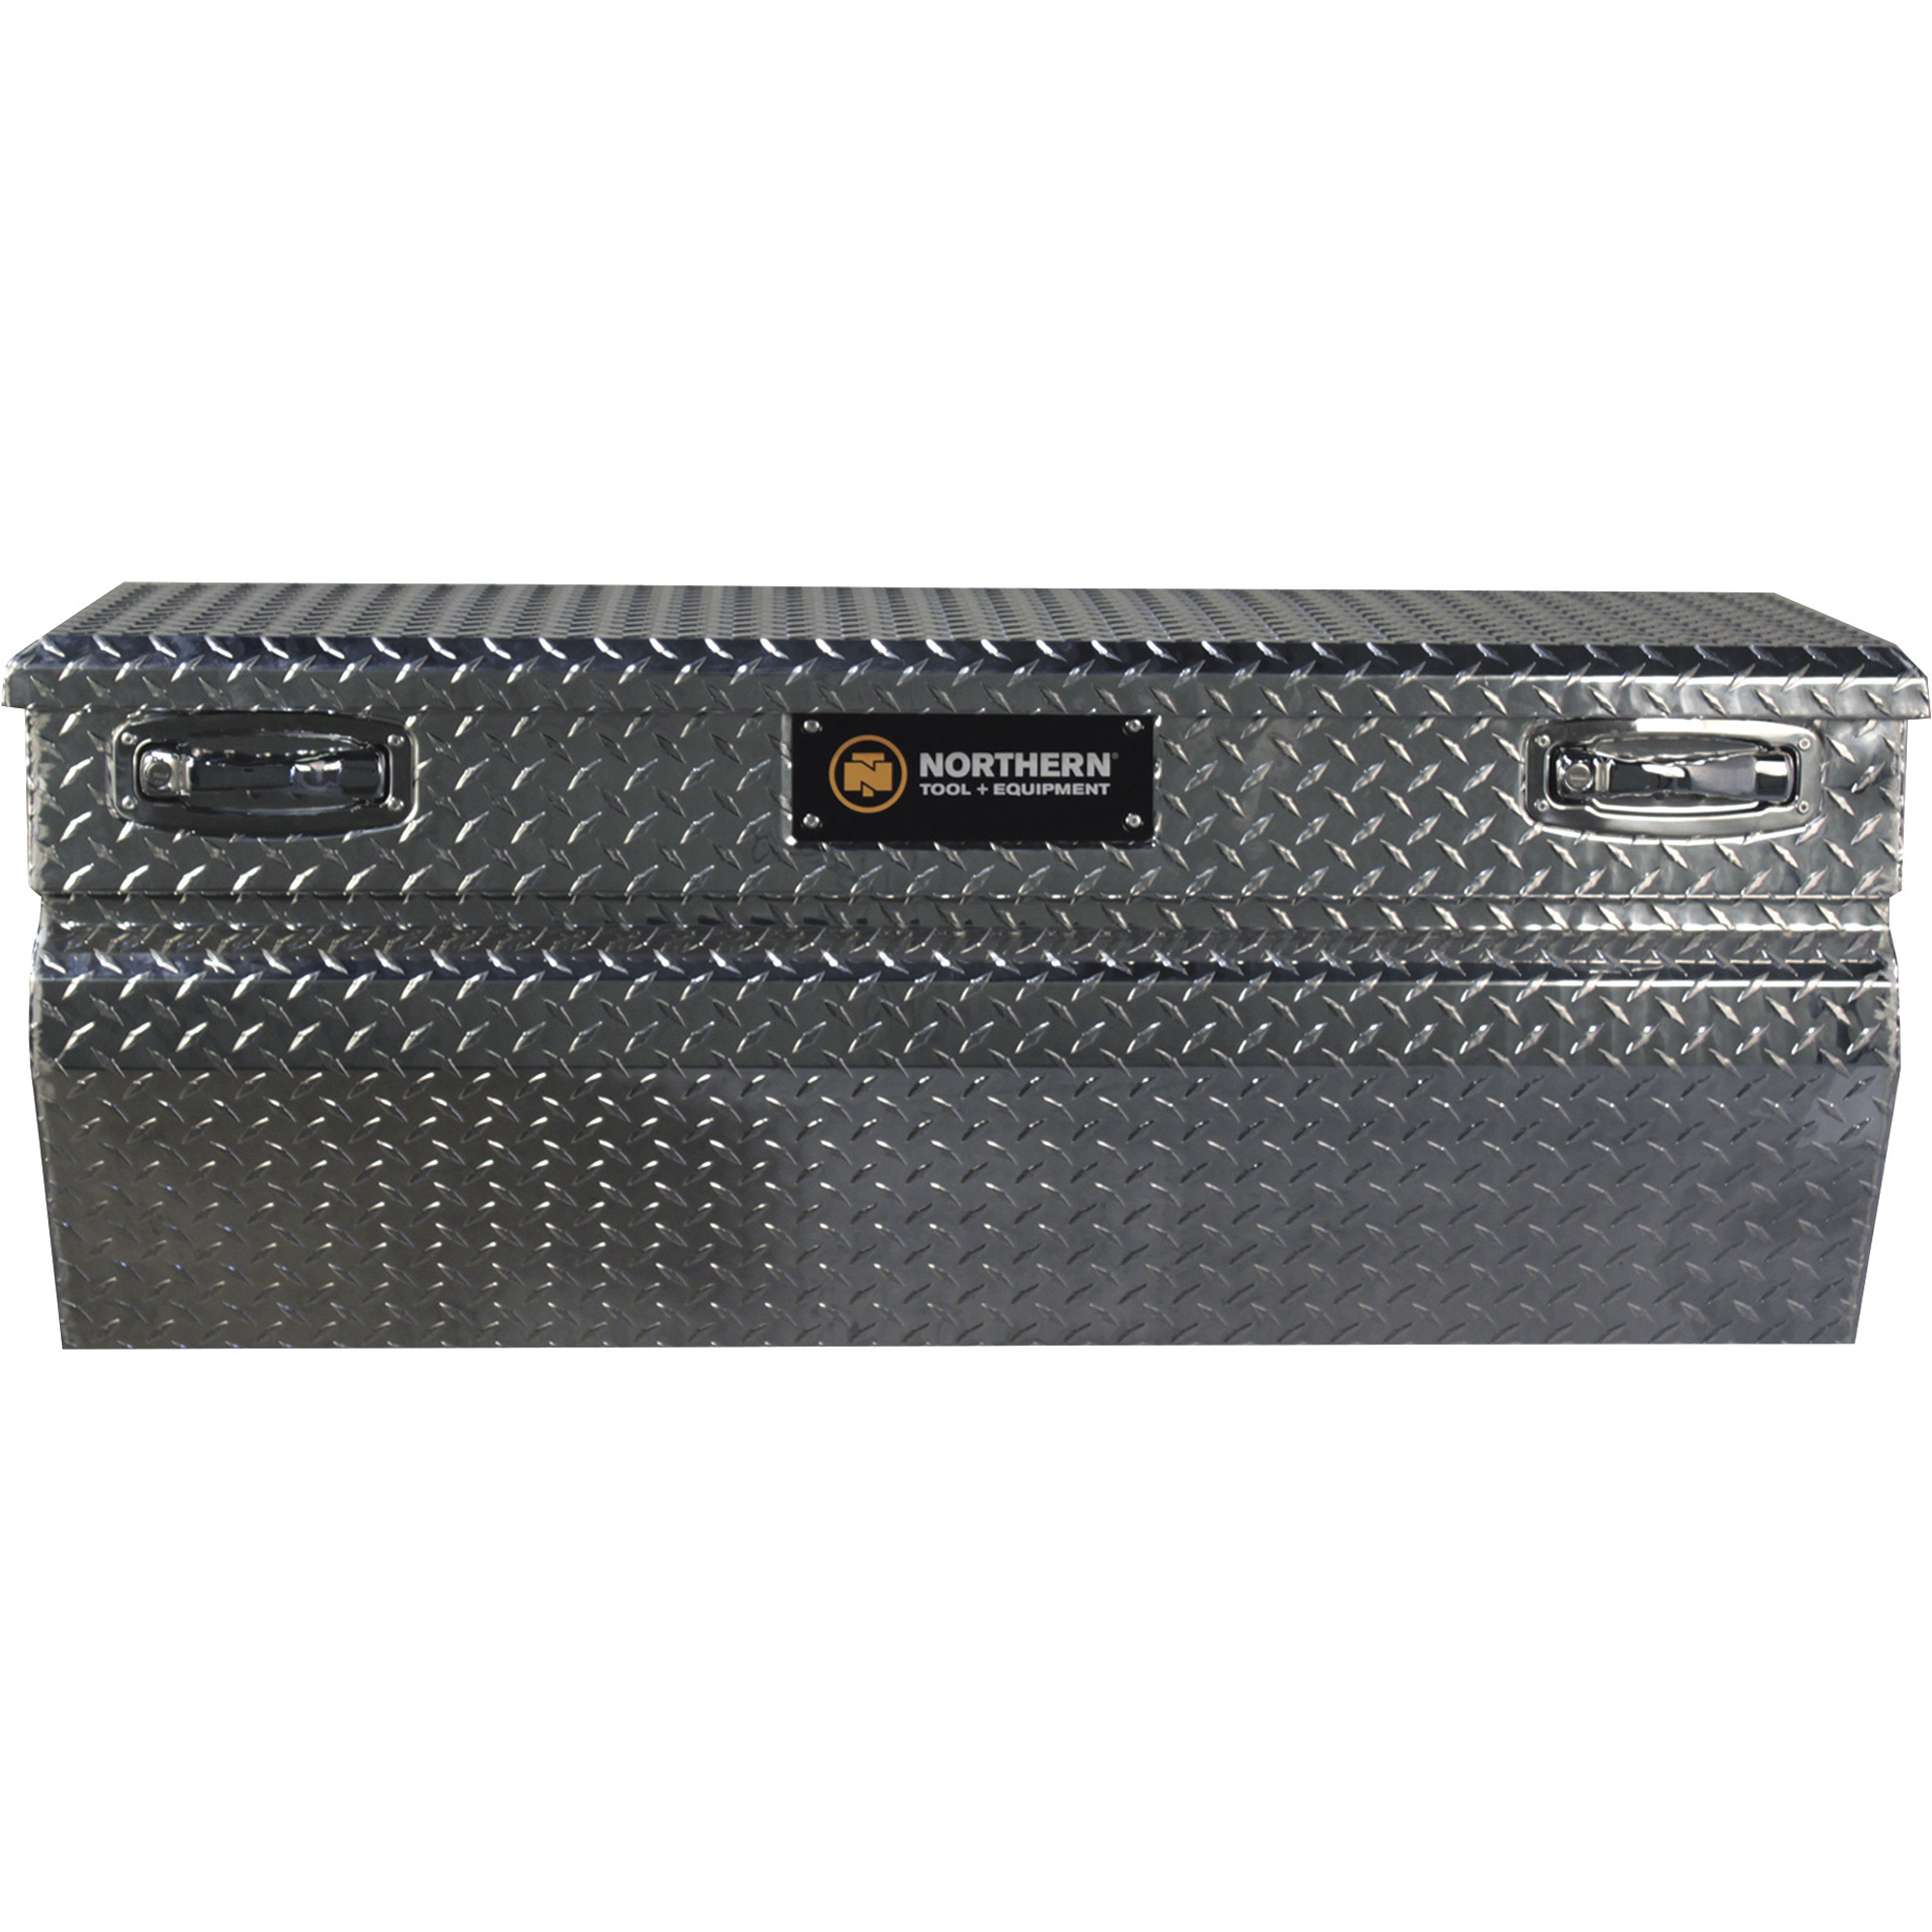 Northern Tool Chest Truck Tool Box, Aluminum, Diamond Plate, Pull Handle Latches, 47.75Inch x 15.75Inch x 20Inch x 18Inch, Model 36012752